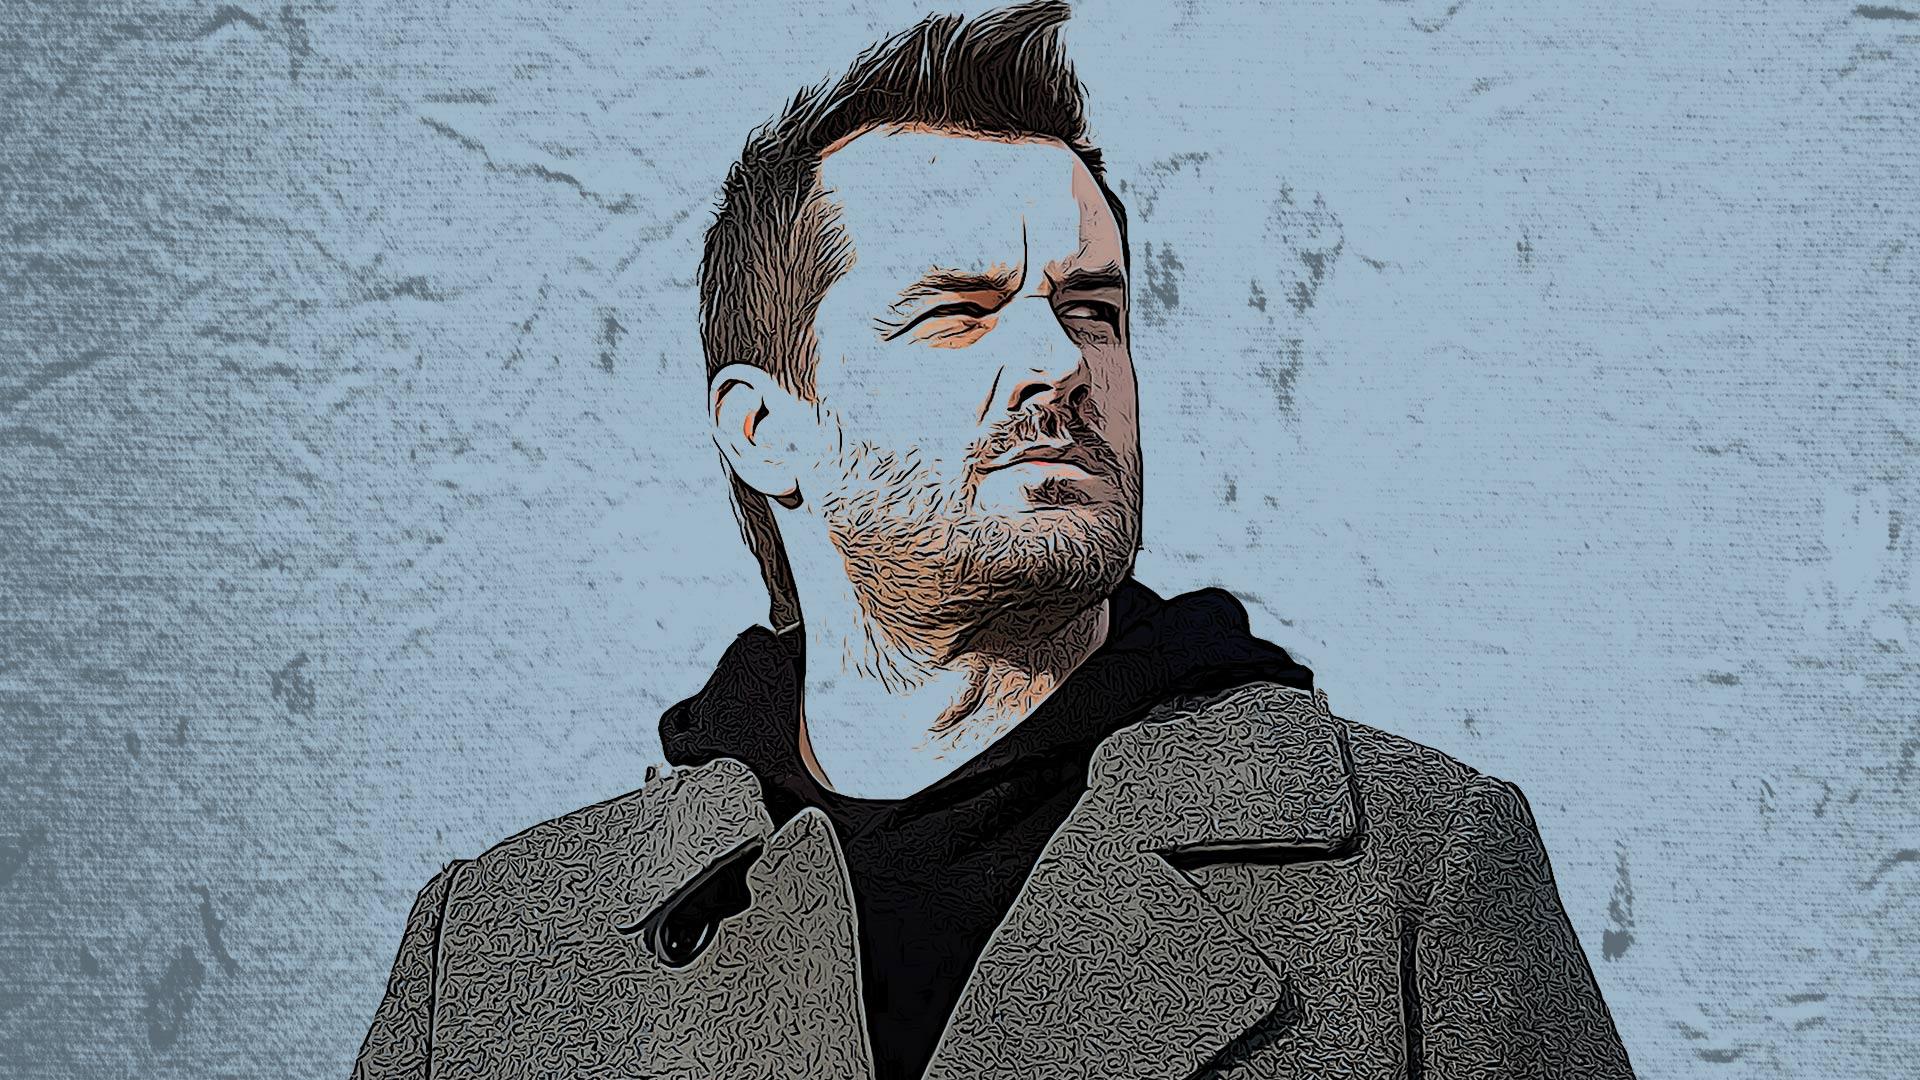 Jim Jefferies: Give 'em What They Want Tour